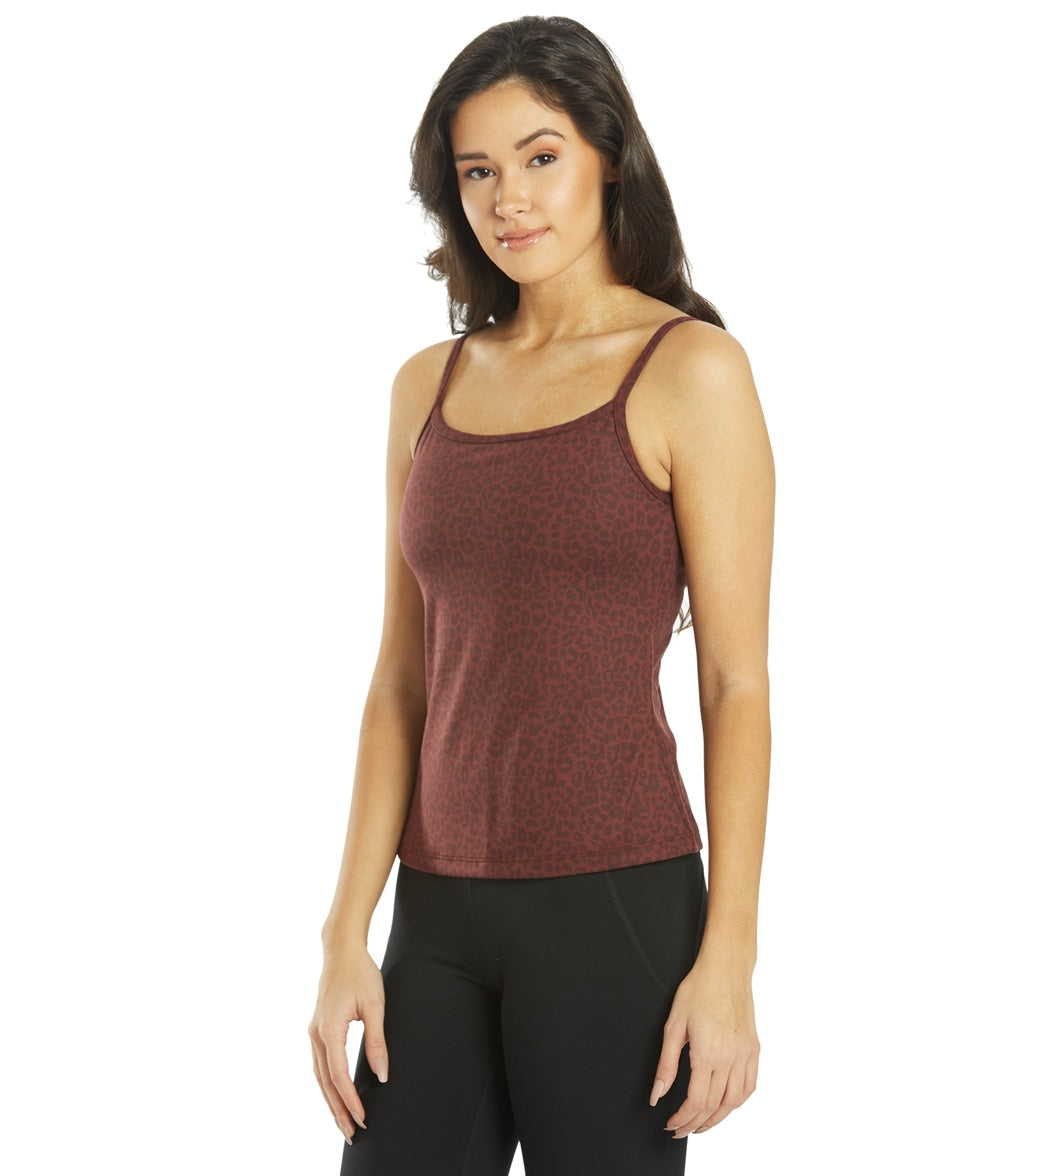 Everyday Yoga Radiant Strappy Back Support Tank at YogaOutlet.com –